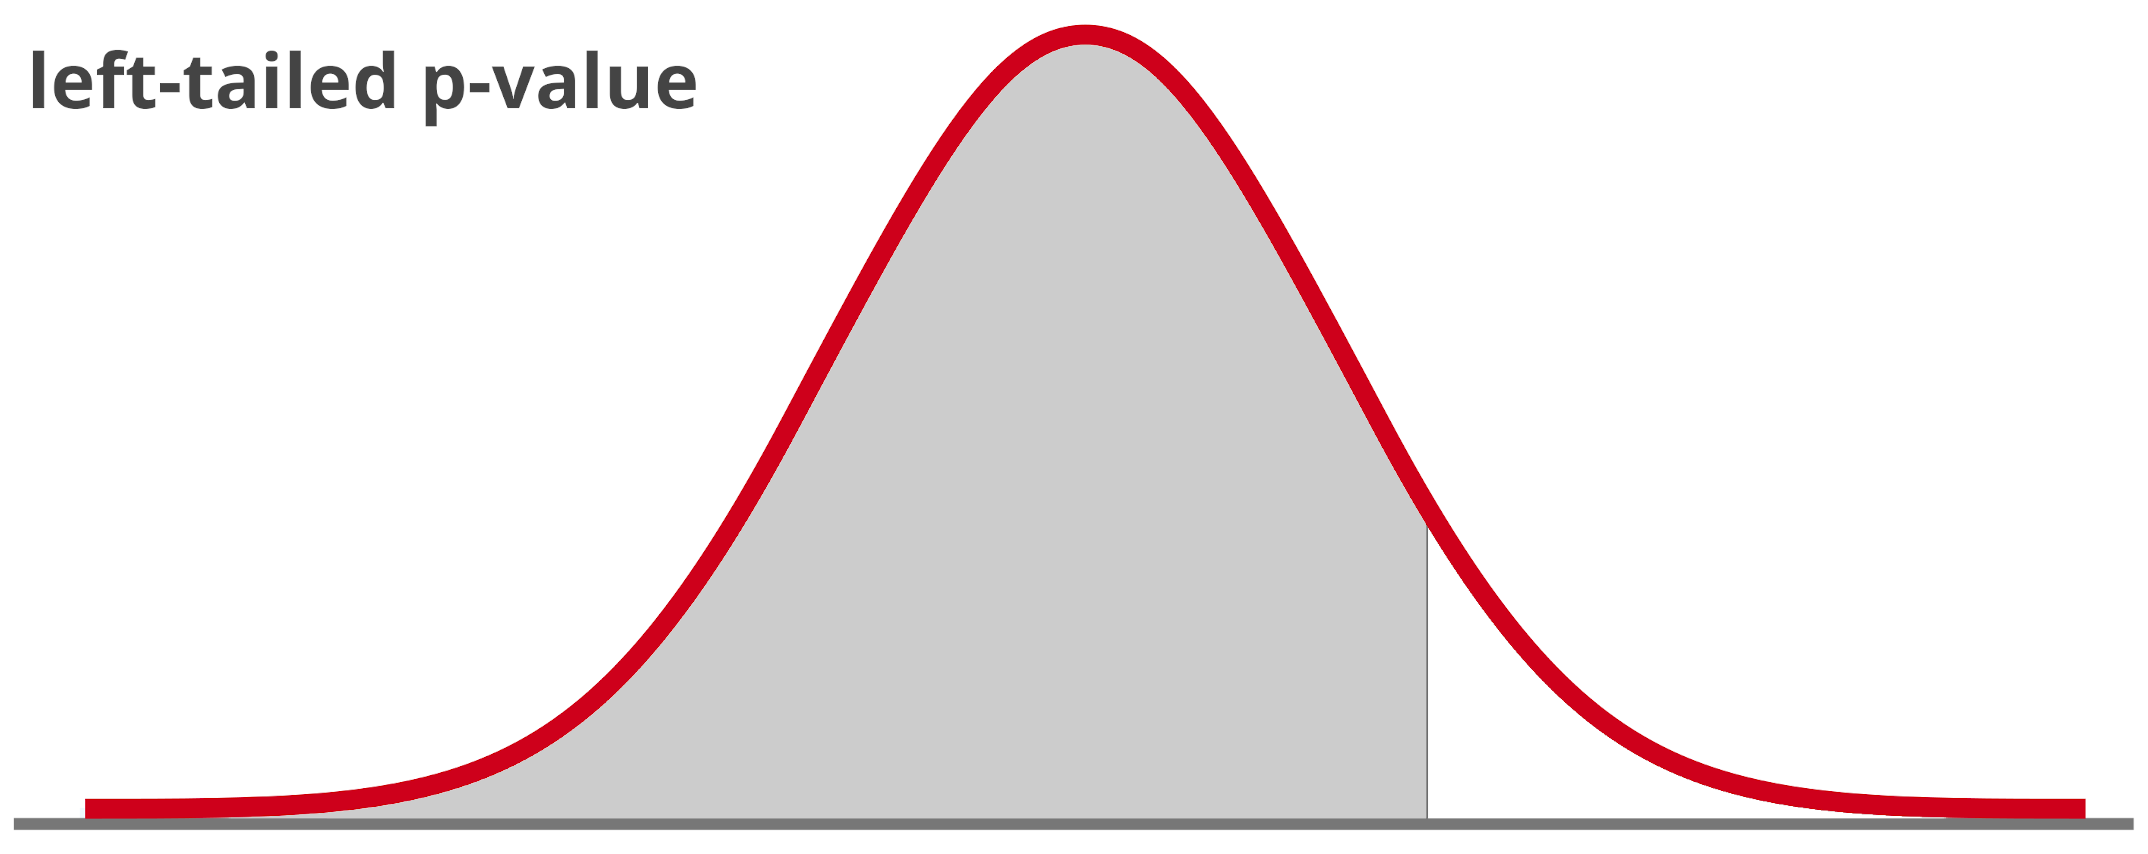 graphic showing a left-tailed p-value for a standard normal distribution